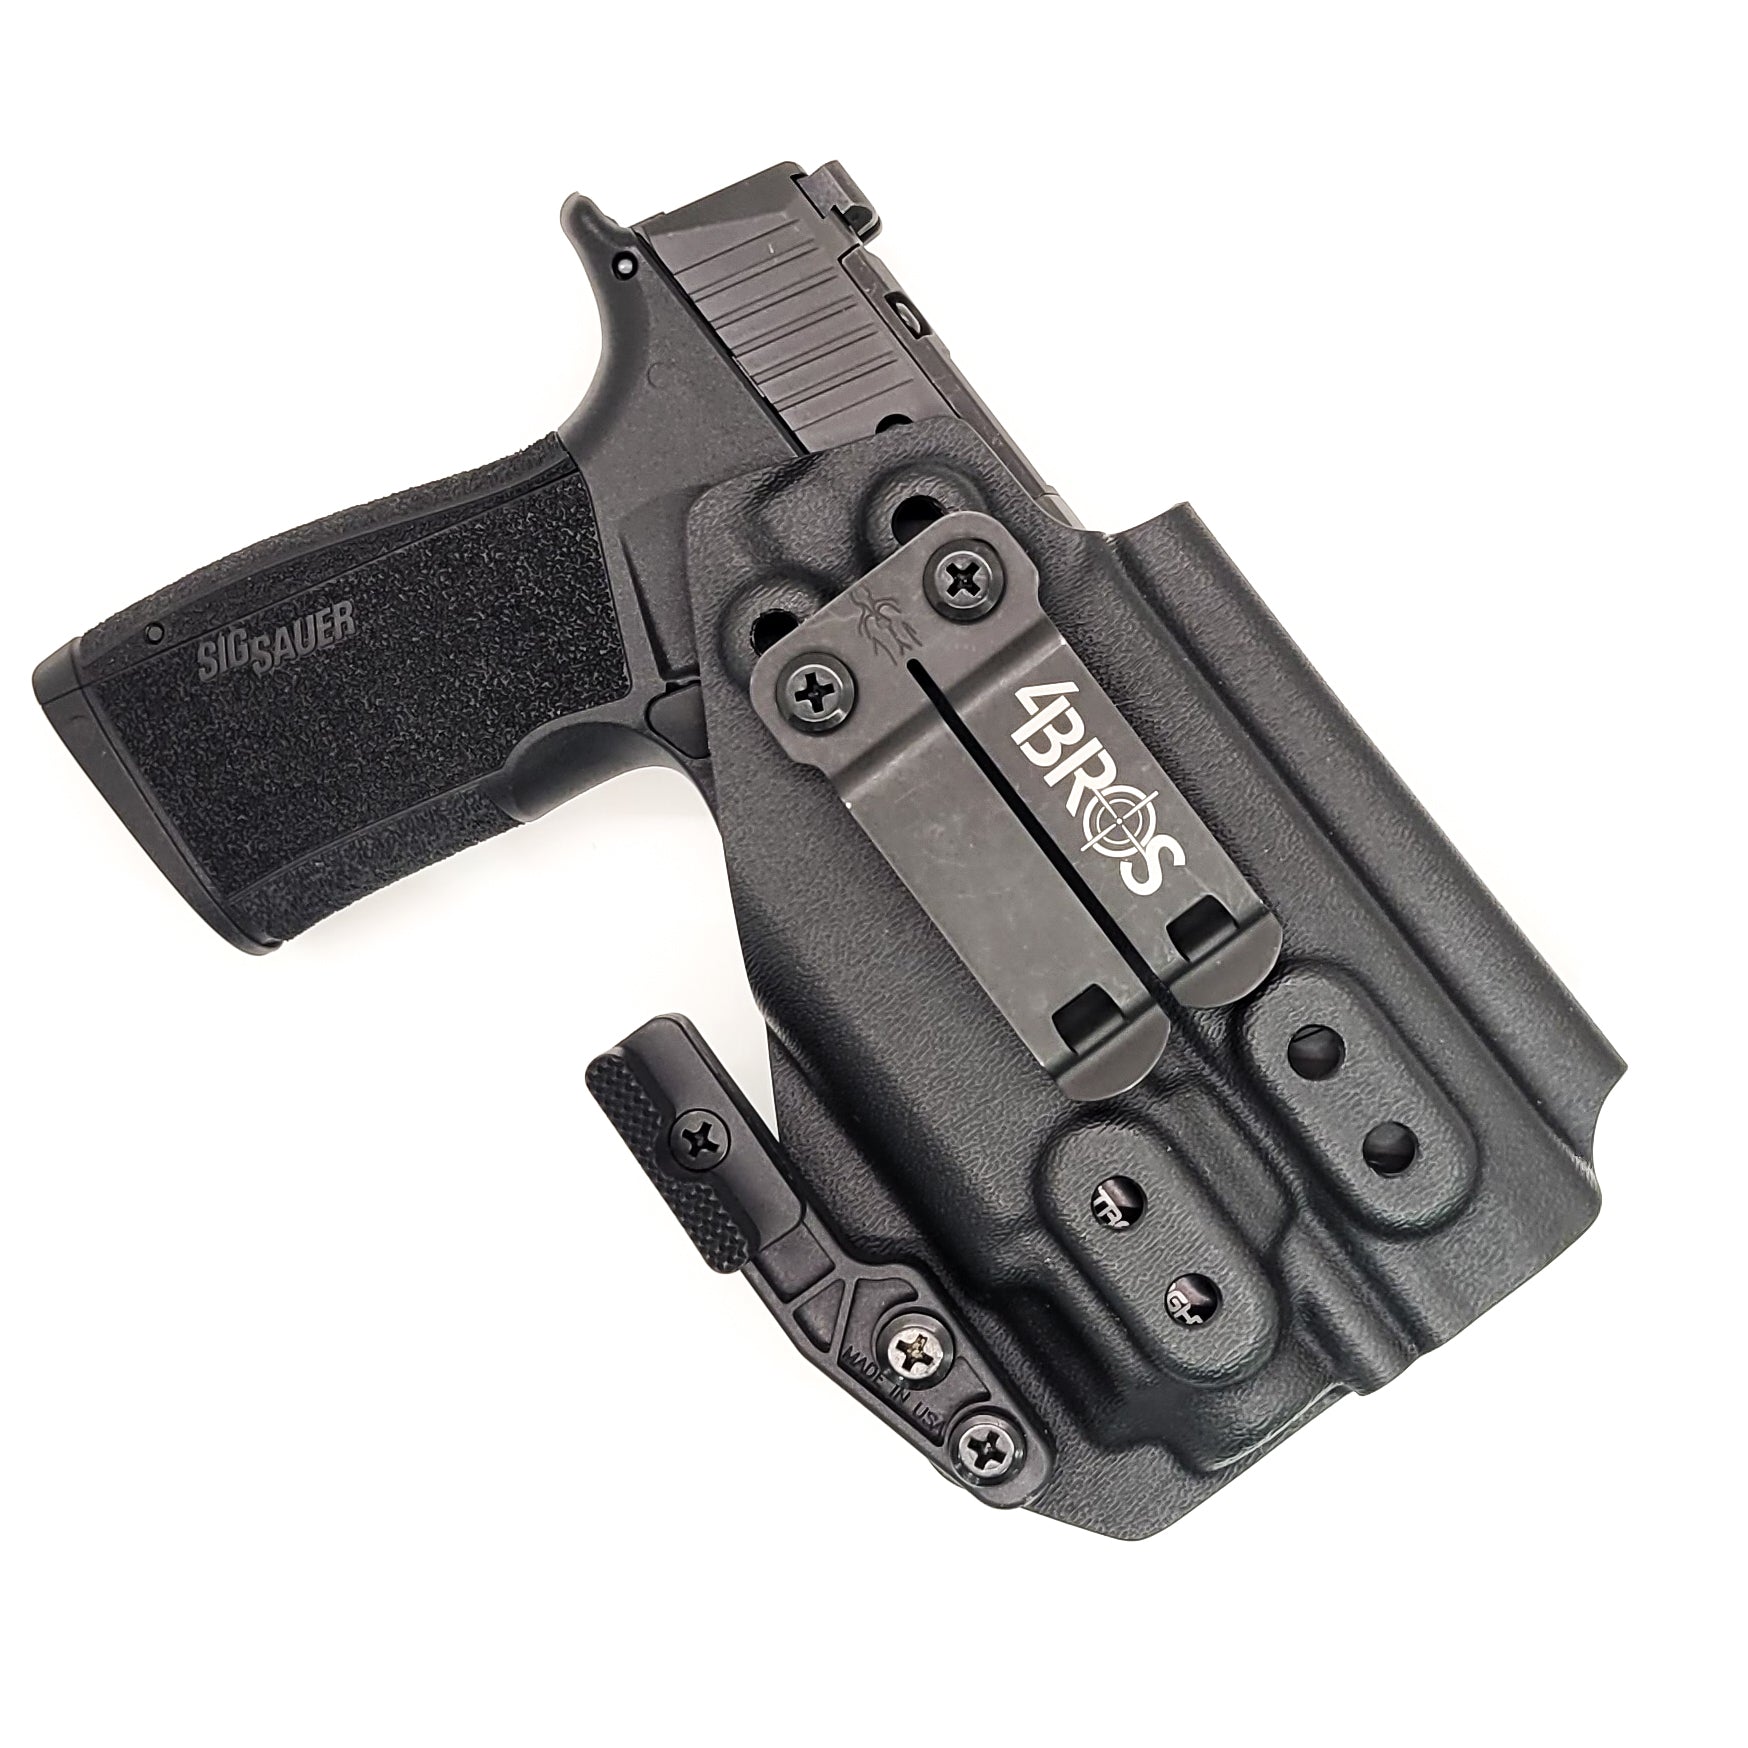 For the best Inside Waistband Kydex Holster designed to fit the Sig Sauer P365-XMACRO with Streamlight TLR-8 Sub, shop Four Brothers Holsters. Full sweat guard, adjustable retention, minimal material & smooth edges to reduce printing. Made in the USA. Open muzzle for threaded barrels, cleared for red dot sights. MACRO